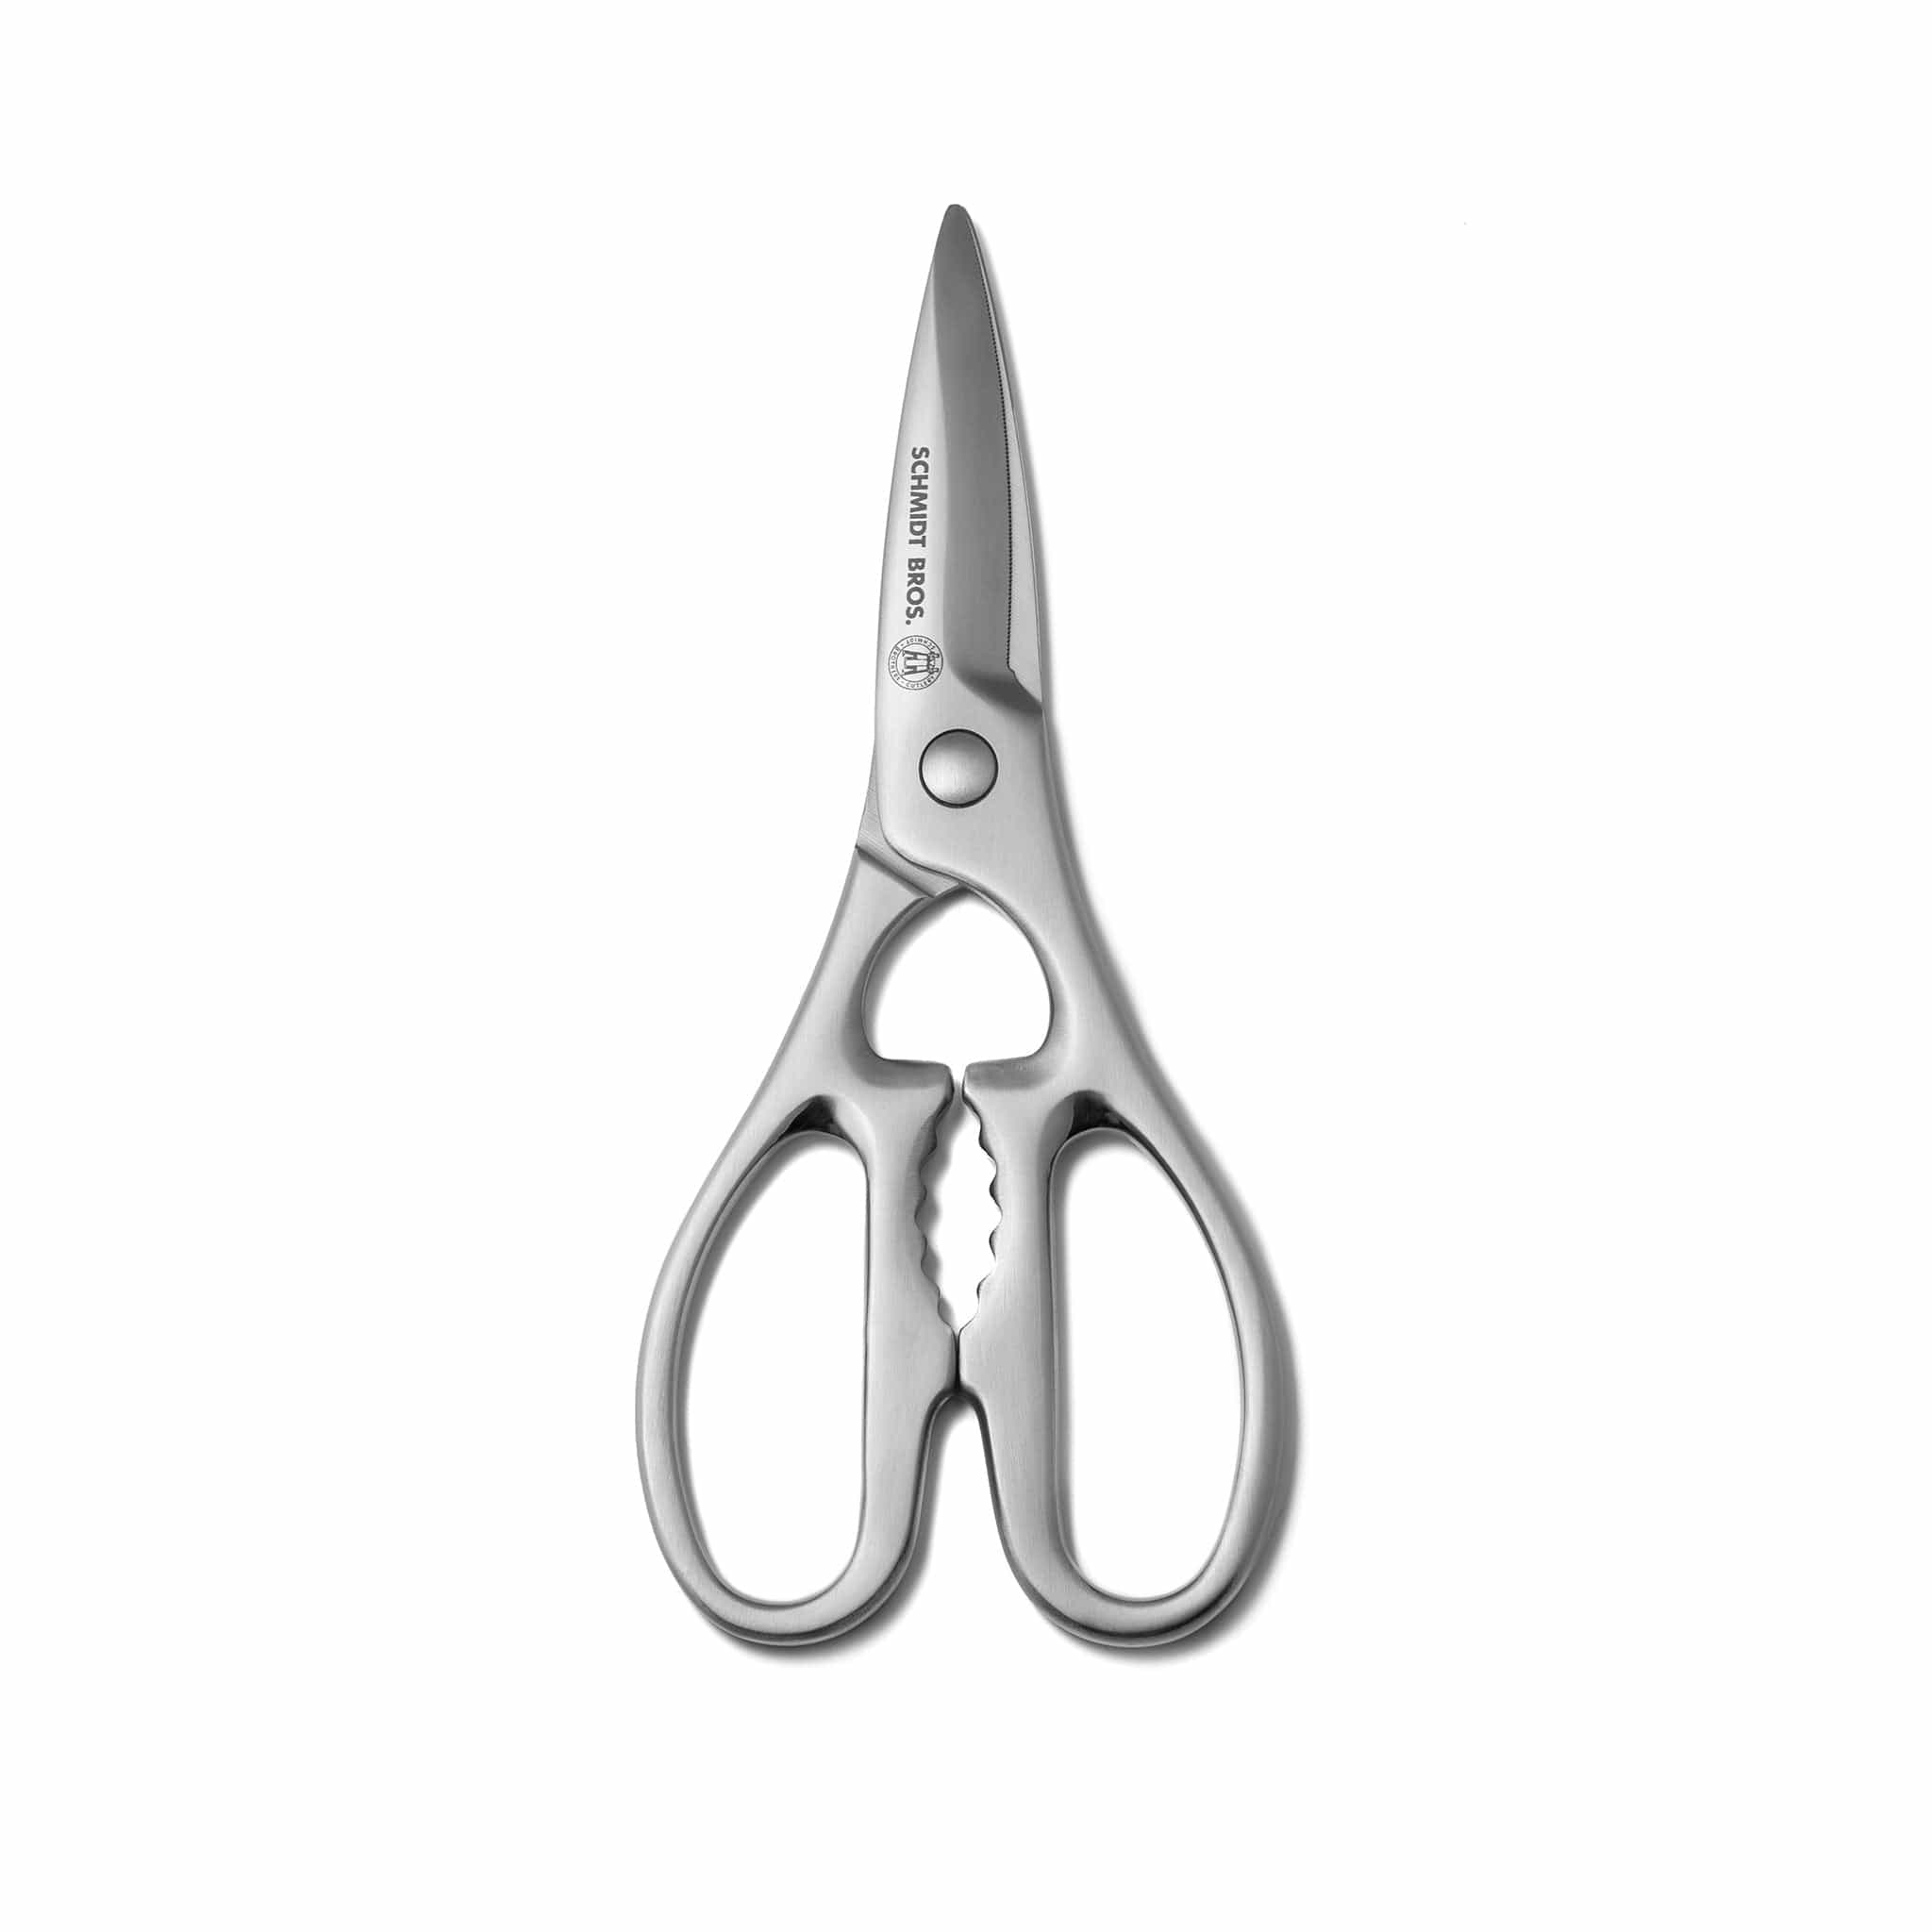 Lamson Forged Hi-Carbon Stainless Steel Kitchen Shears